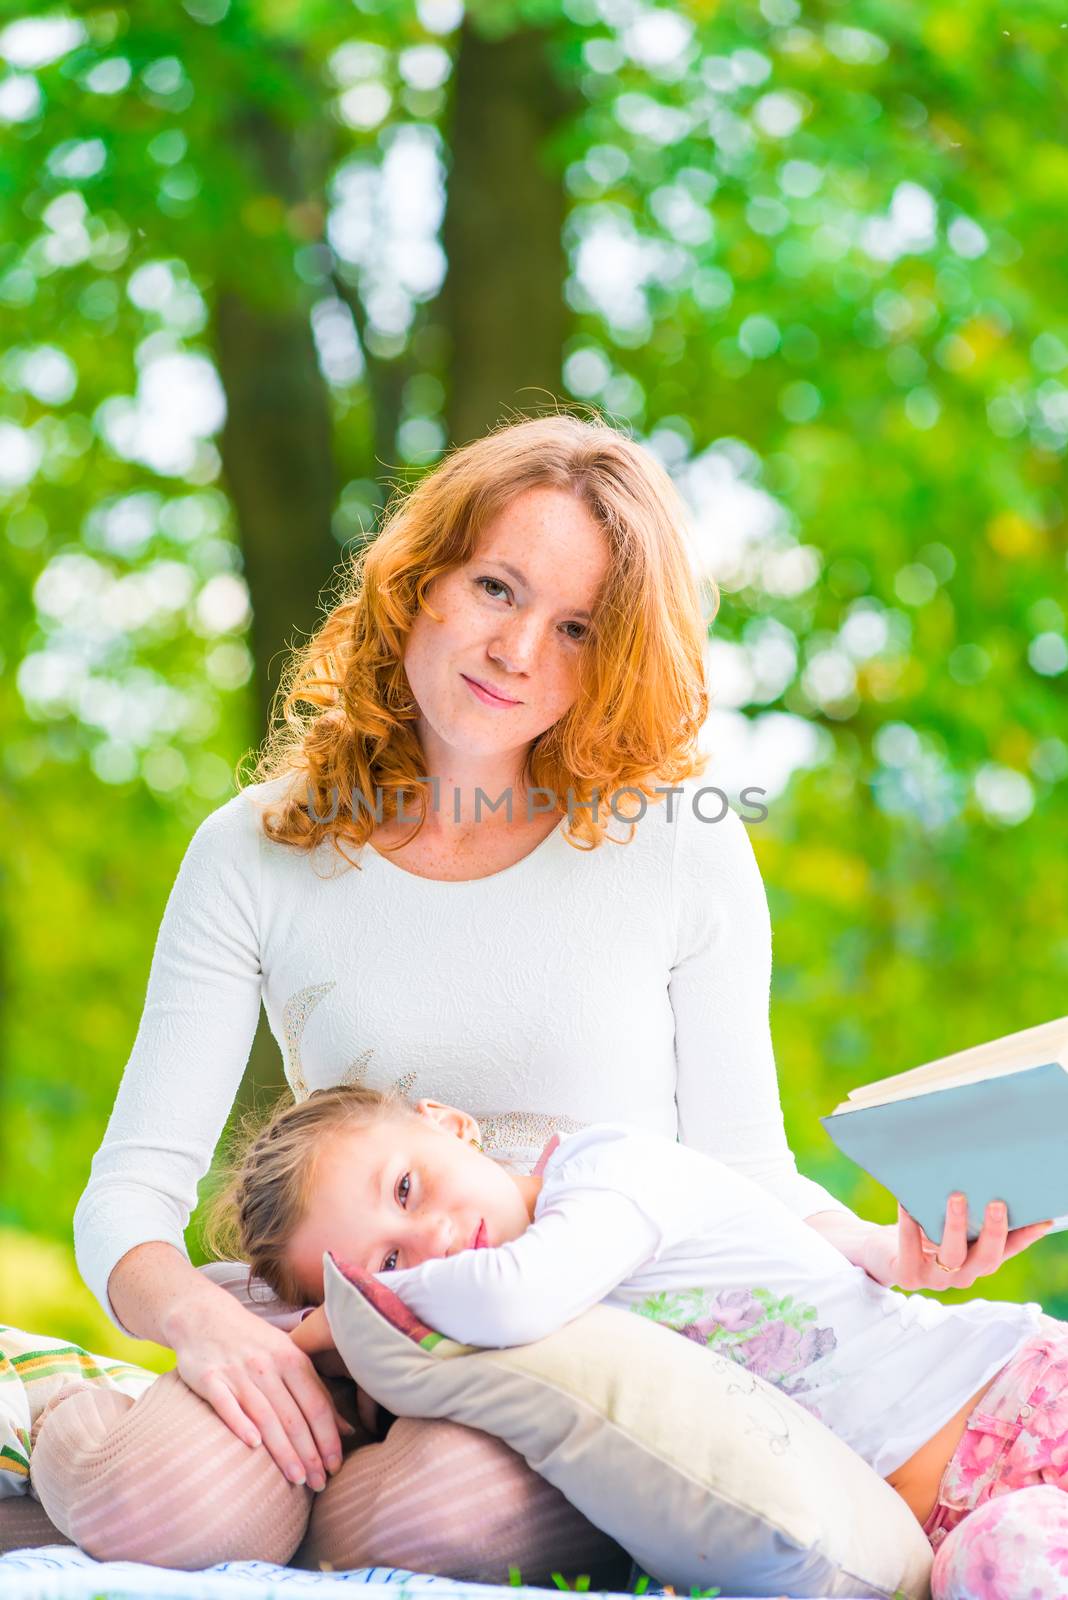 Vertical portrait of a mother and daughter in the park by kosmsos111